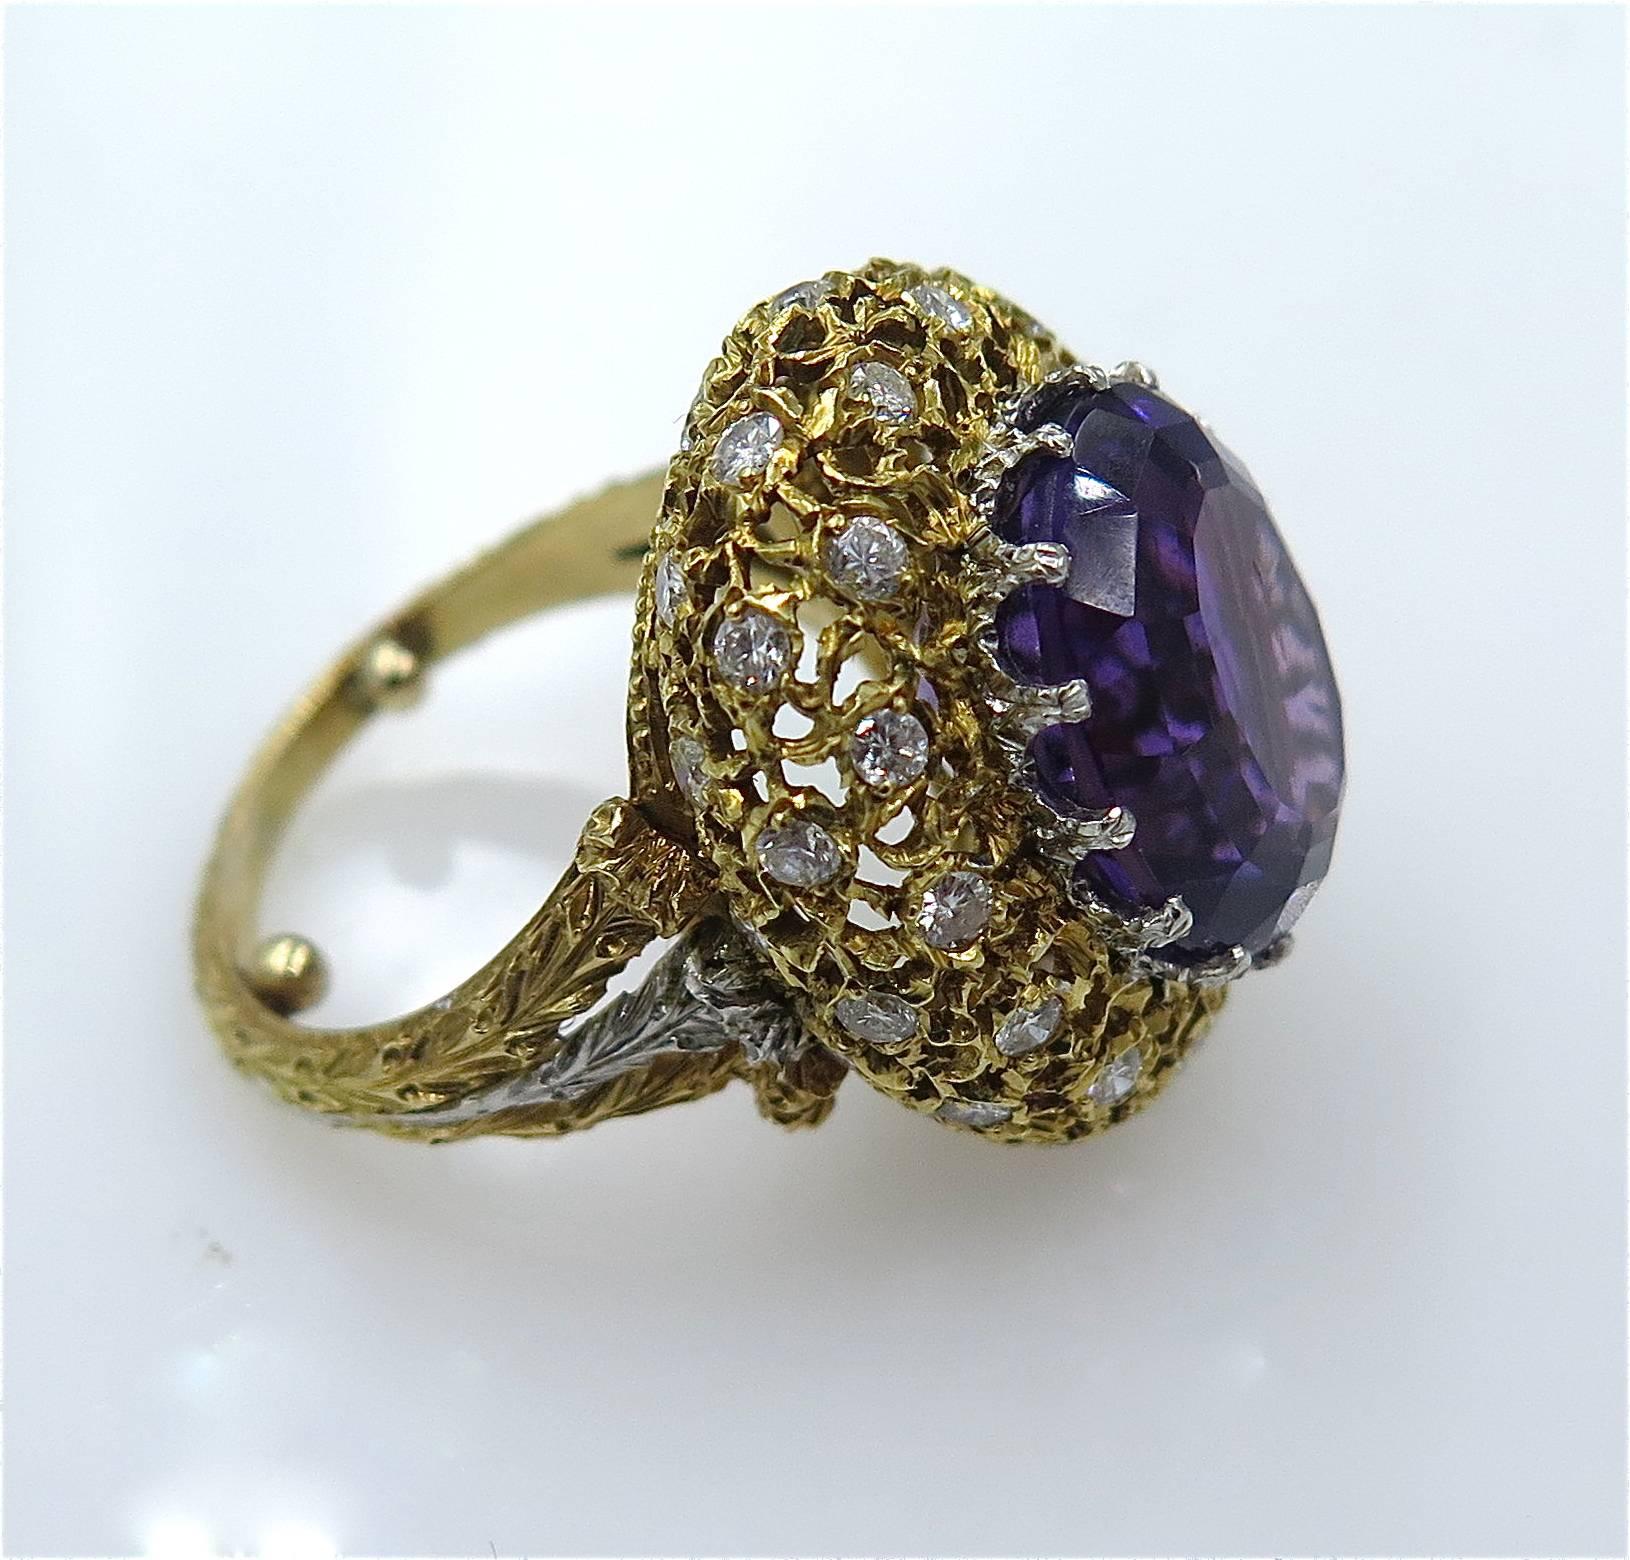 An 18 karat gold, amethyst and diamond ring, Buccellati, Italian. Centering an oval-cut amethyst, measuring approximately 14.00 x 16.90 x 9.00mm, and weighing approximately 7.65 carats, within a textured gold openwork bombe surround, enhanced by